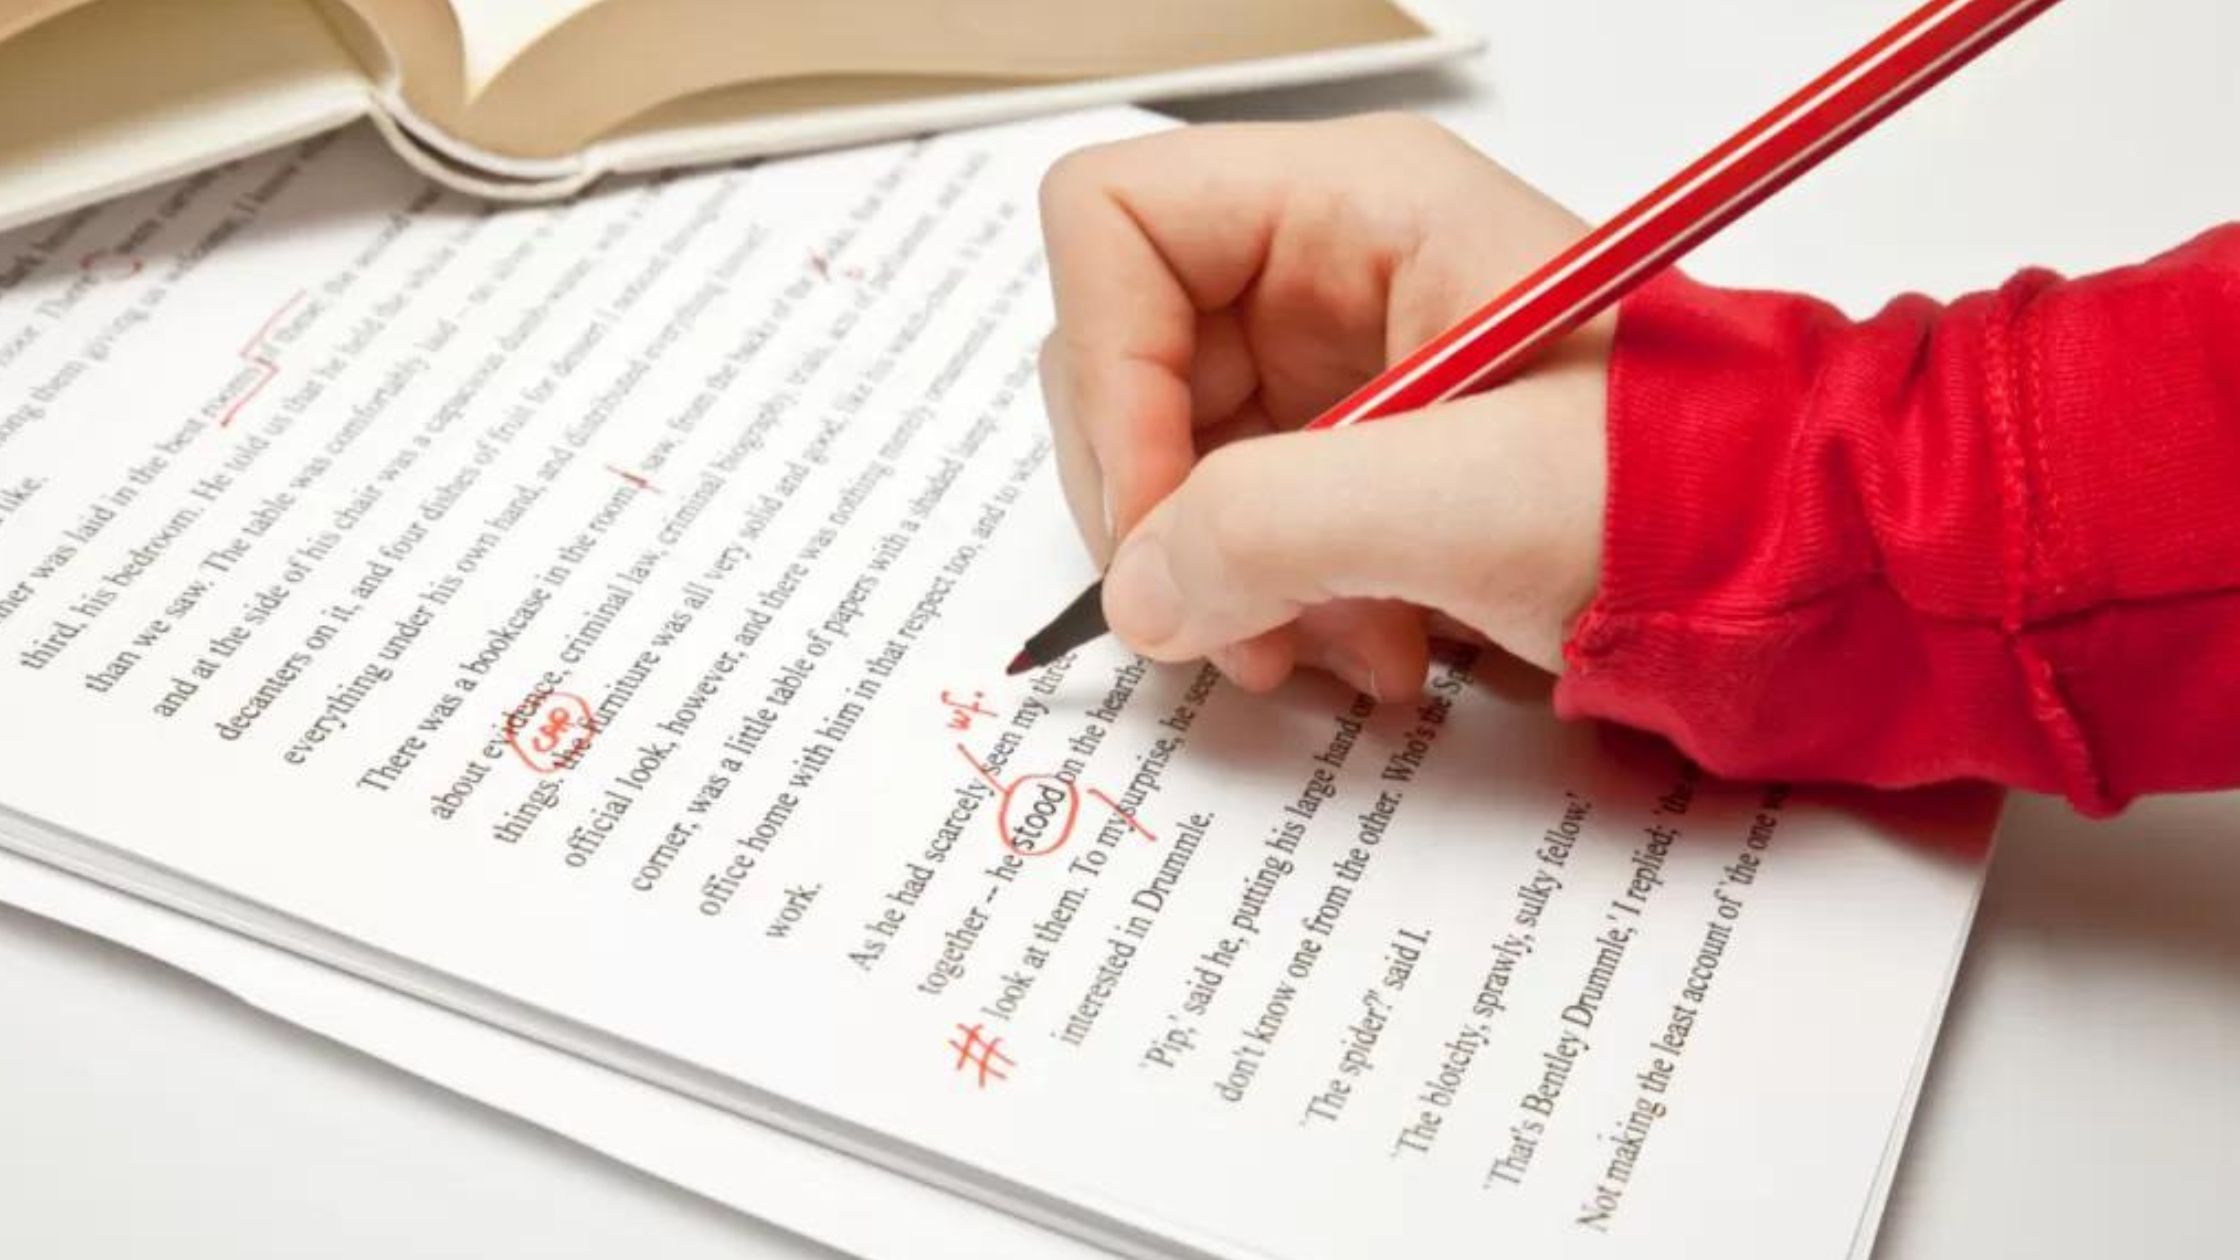 Translation, editing and proofreading: What’s the difference?